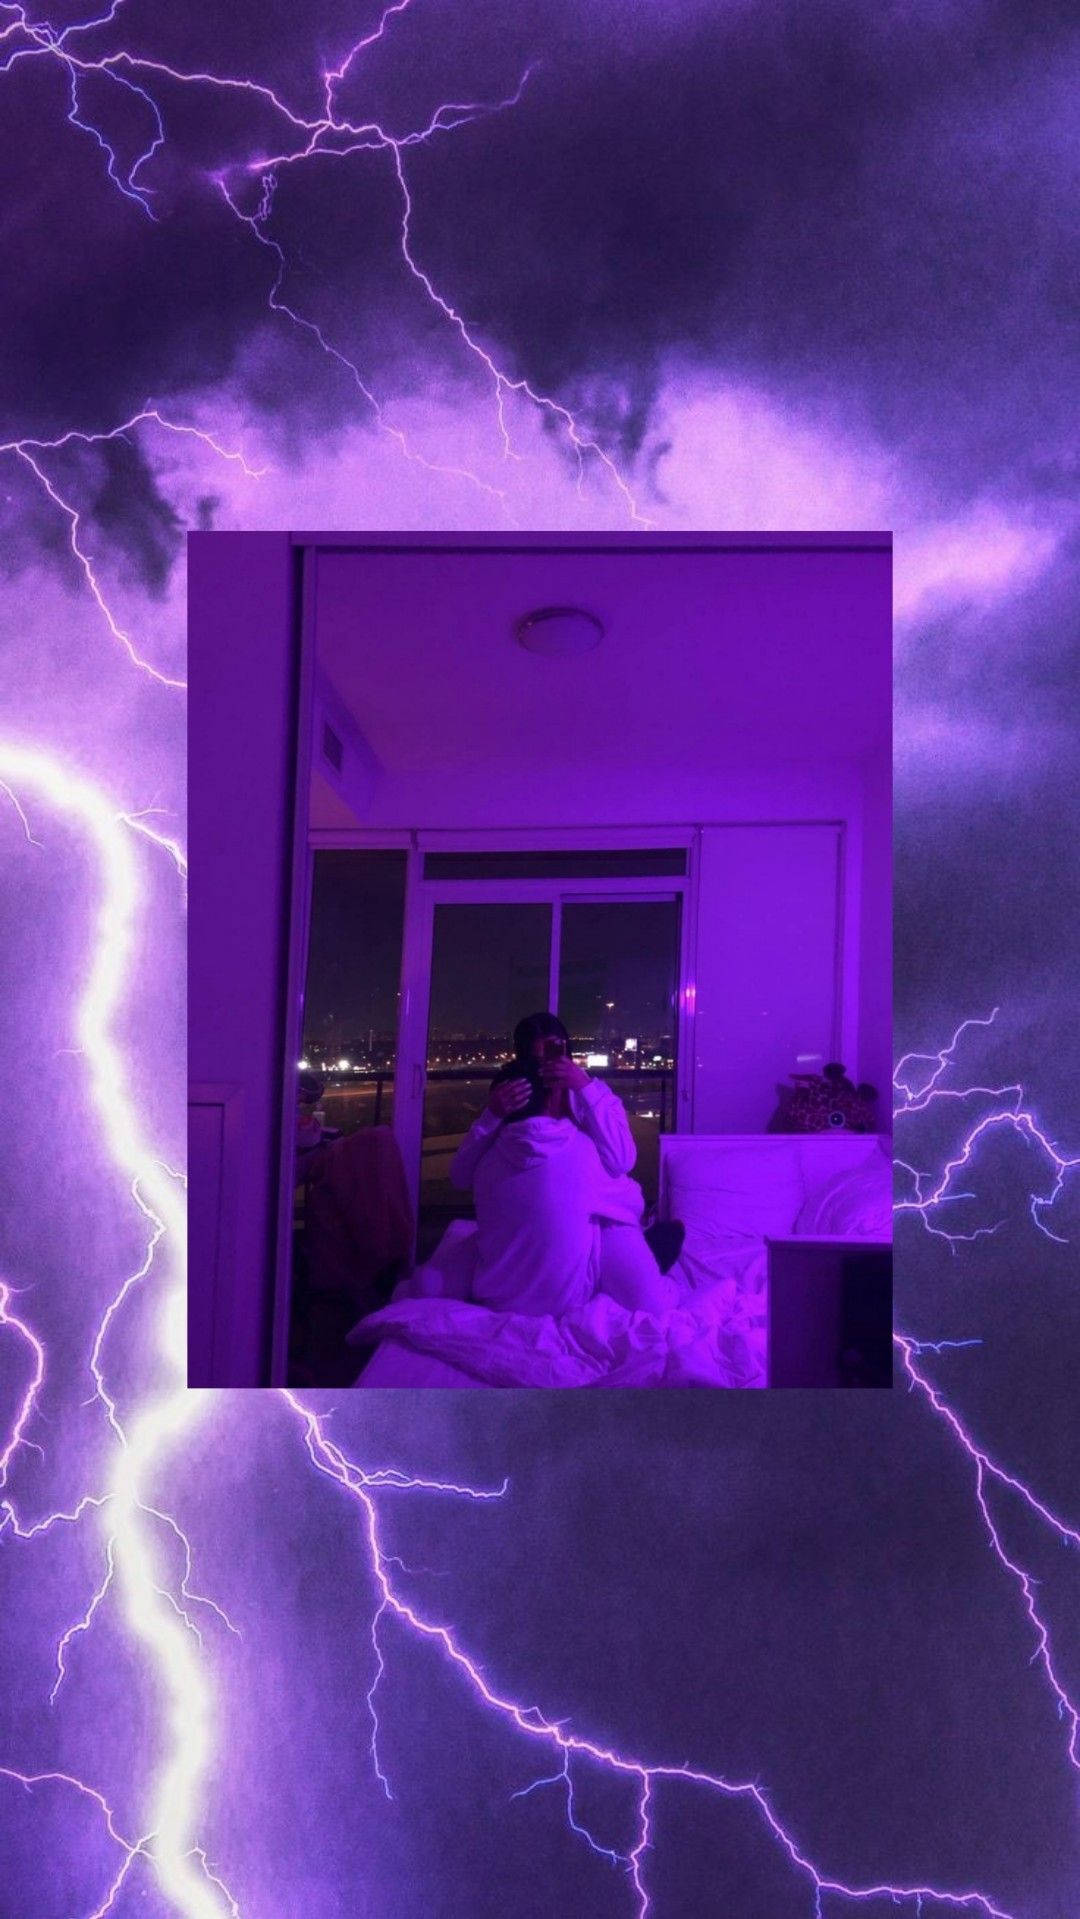 A Picture Of A Person In Bed With Lightning In The Background